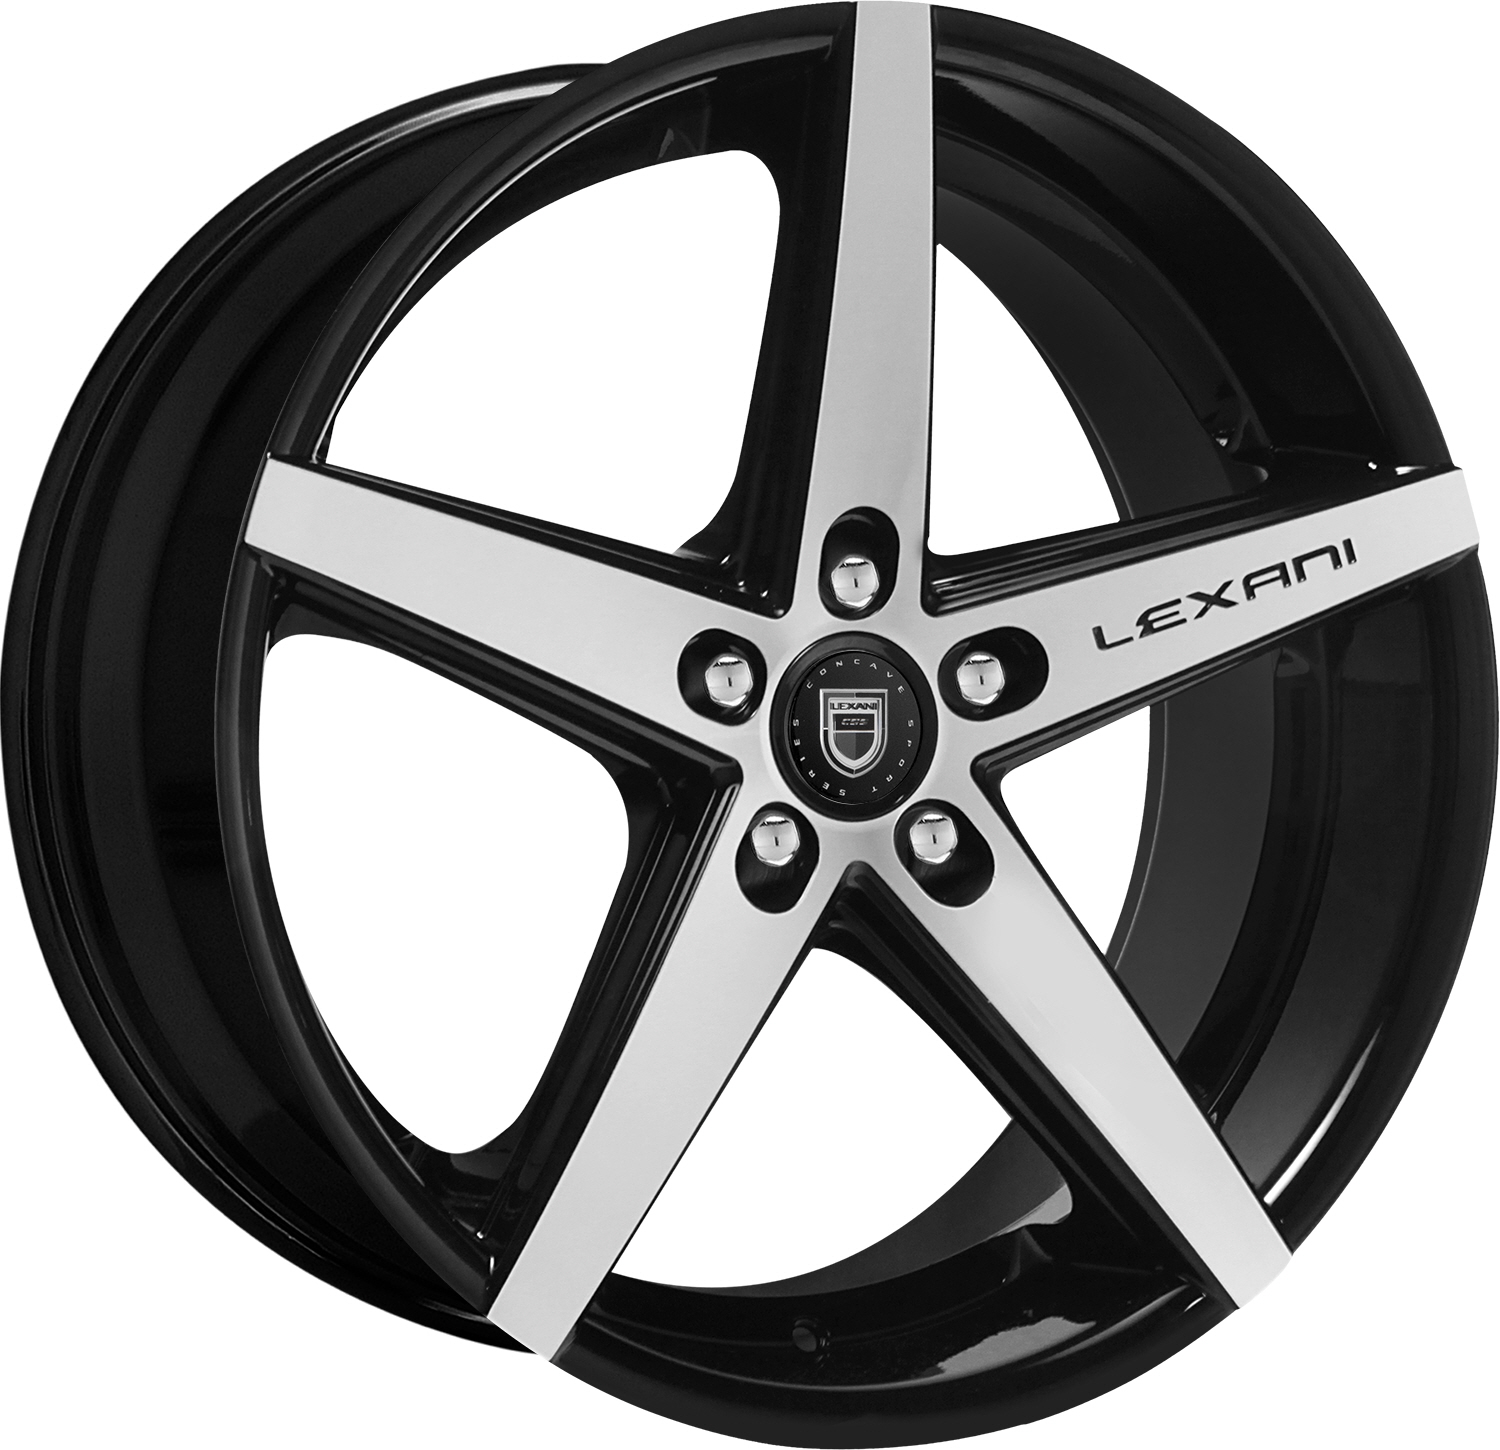 R-FOUR  WHEELS AND RIMS PACKAGES